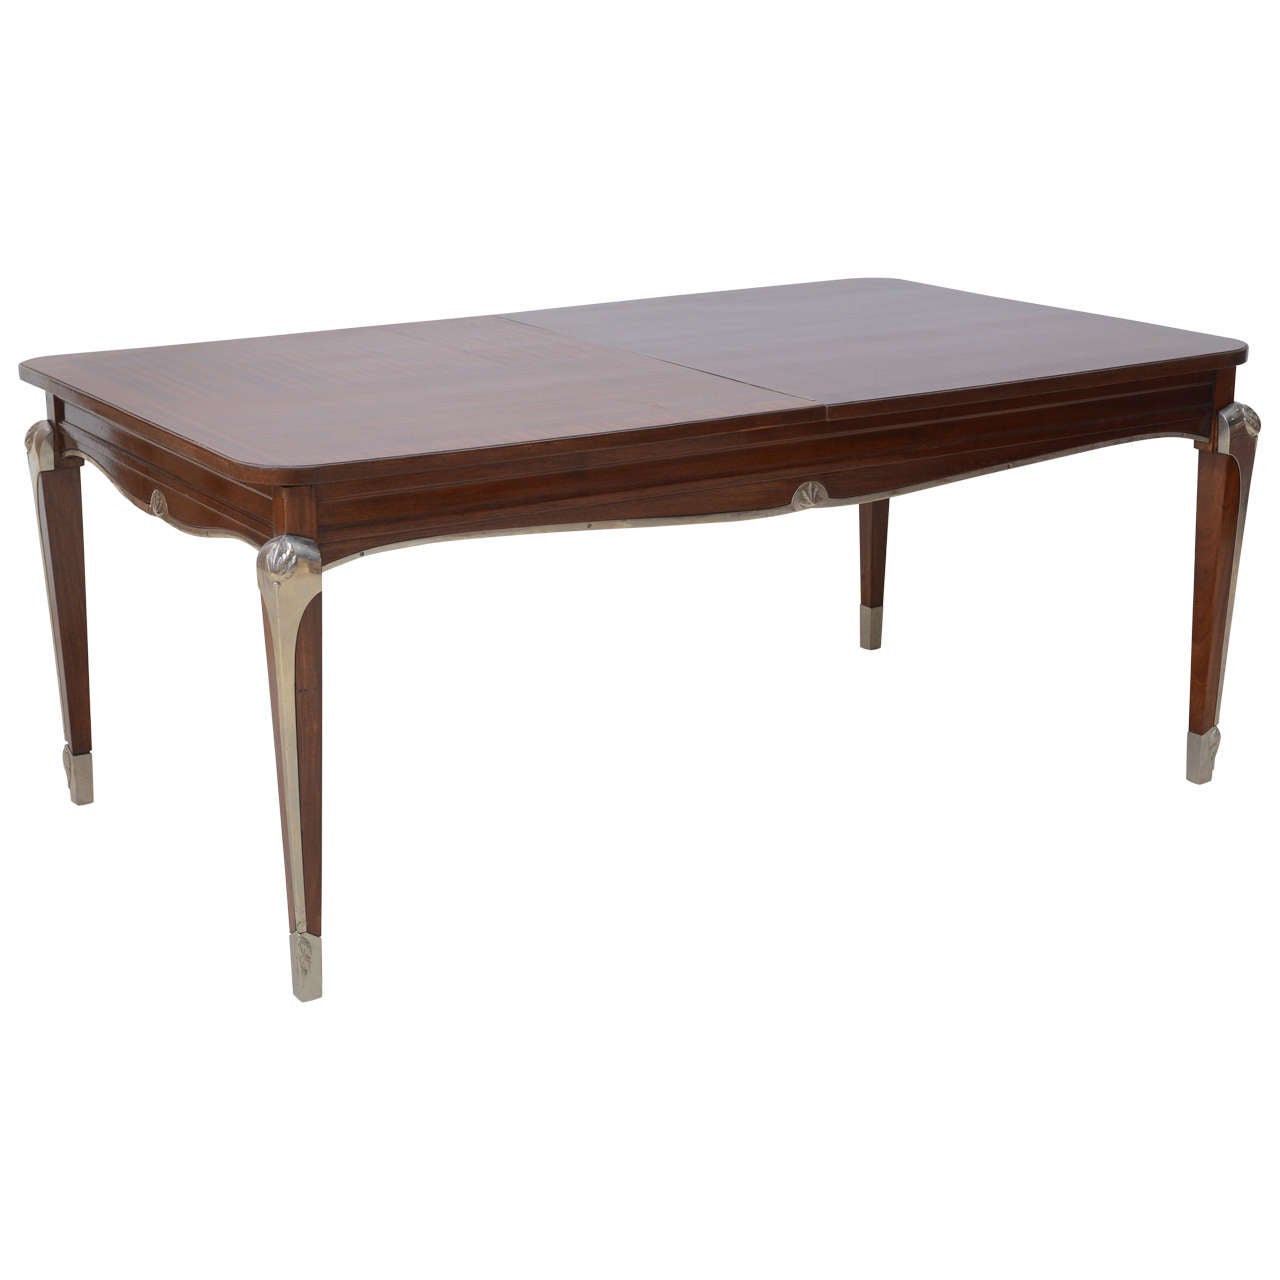 Late Art Deco Palisander Extension Dining Table by Jean Pascaud For Sale